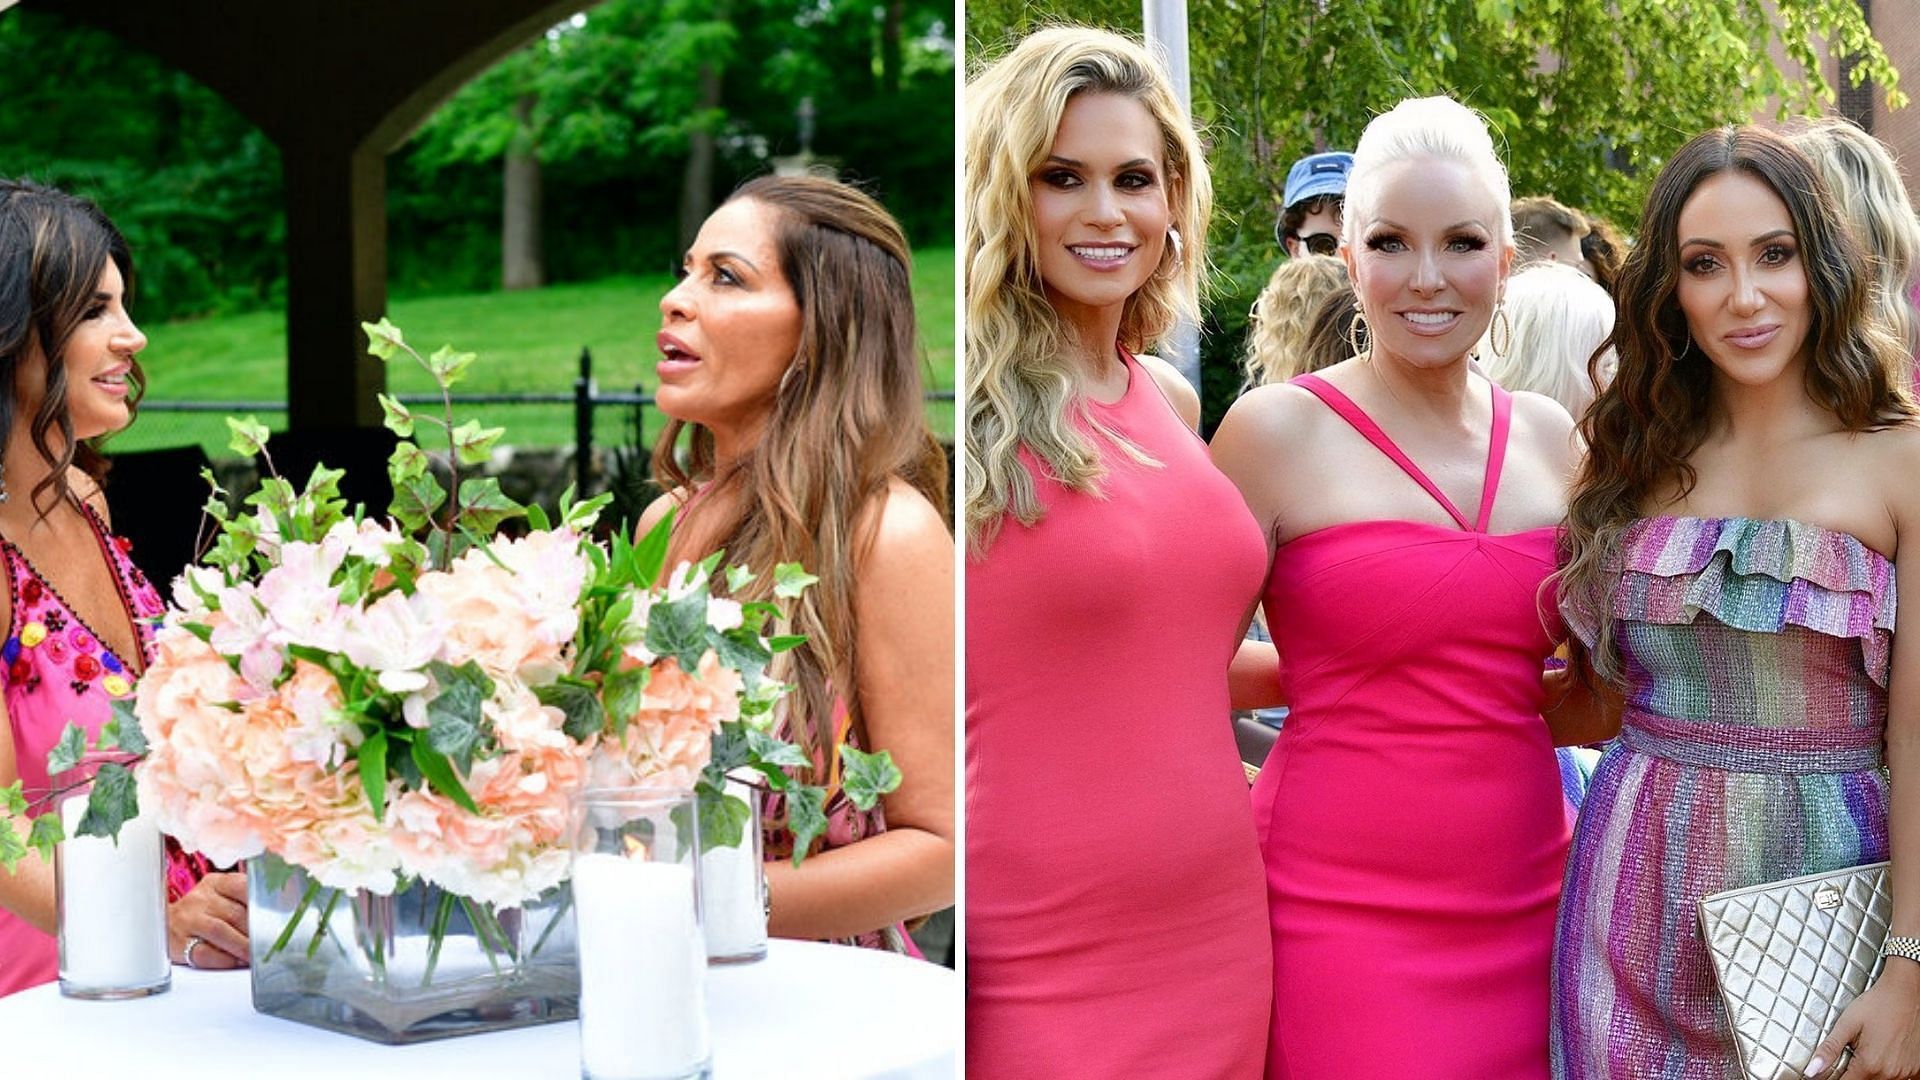 Is RHONJ Season 13 on the cards? New housewives possible demotion and